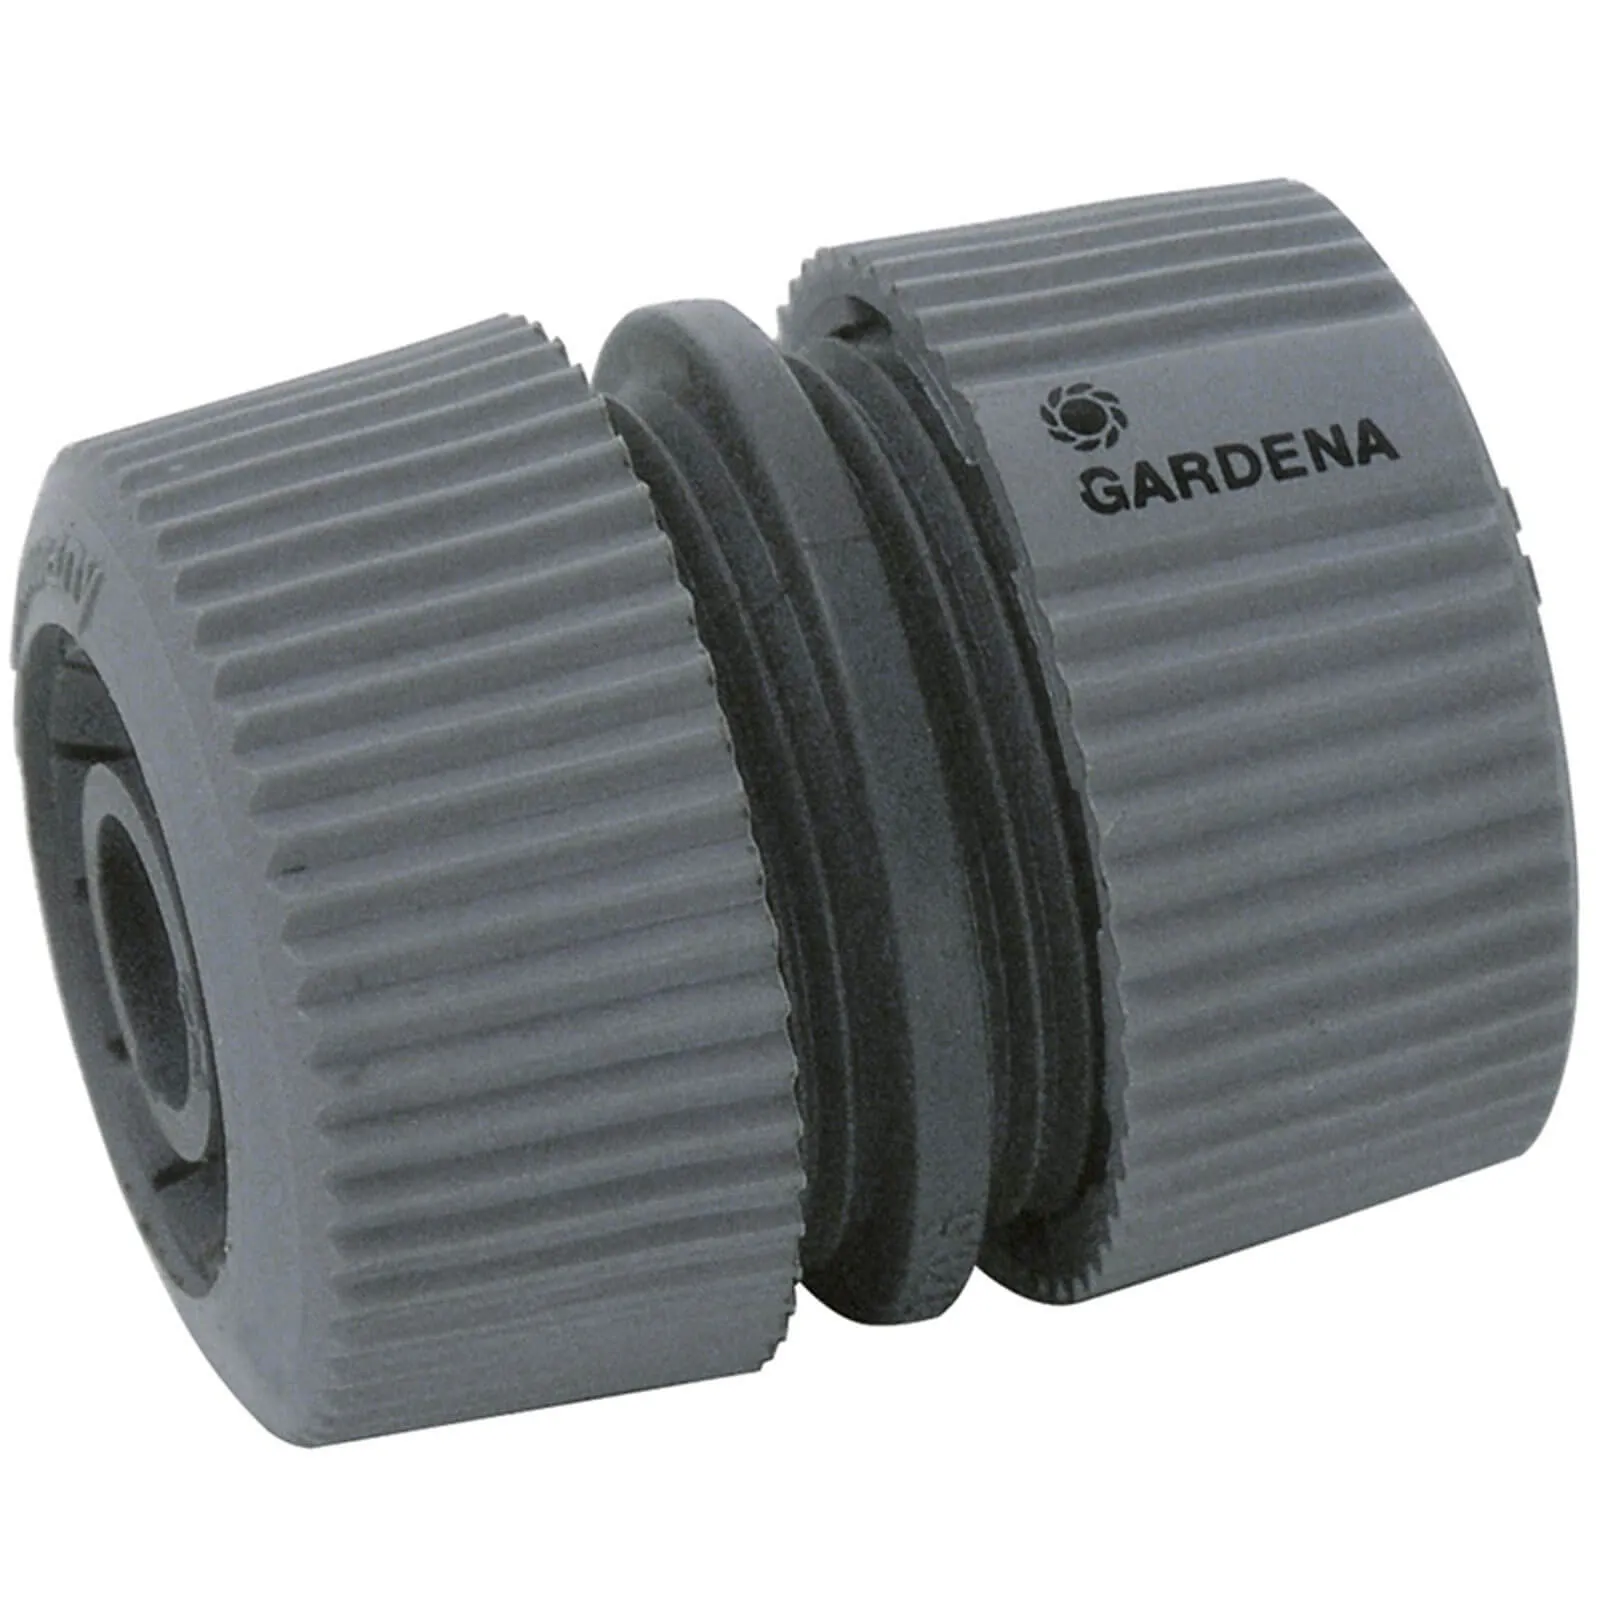 Gardena ORIGINAL Hose Pipe Repairer and Joiner - 3/4" / 19mm, Pack of 1